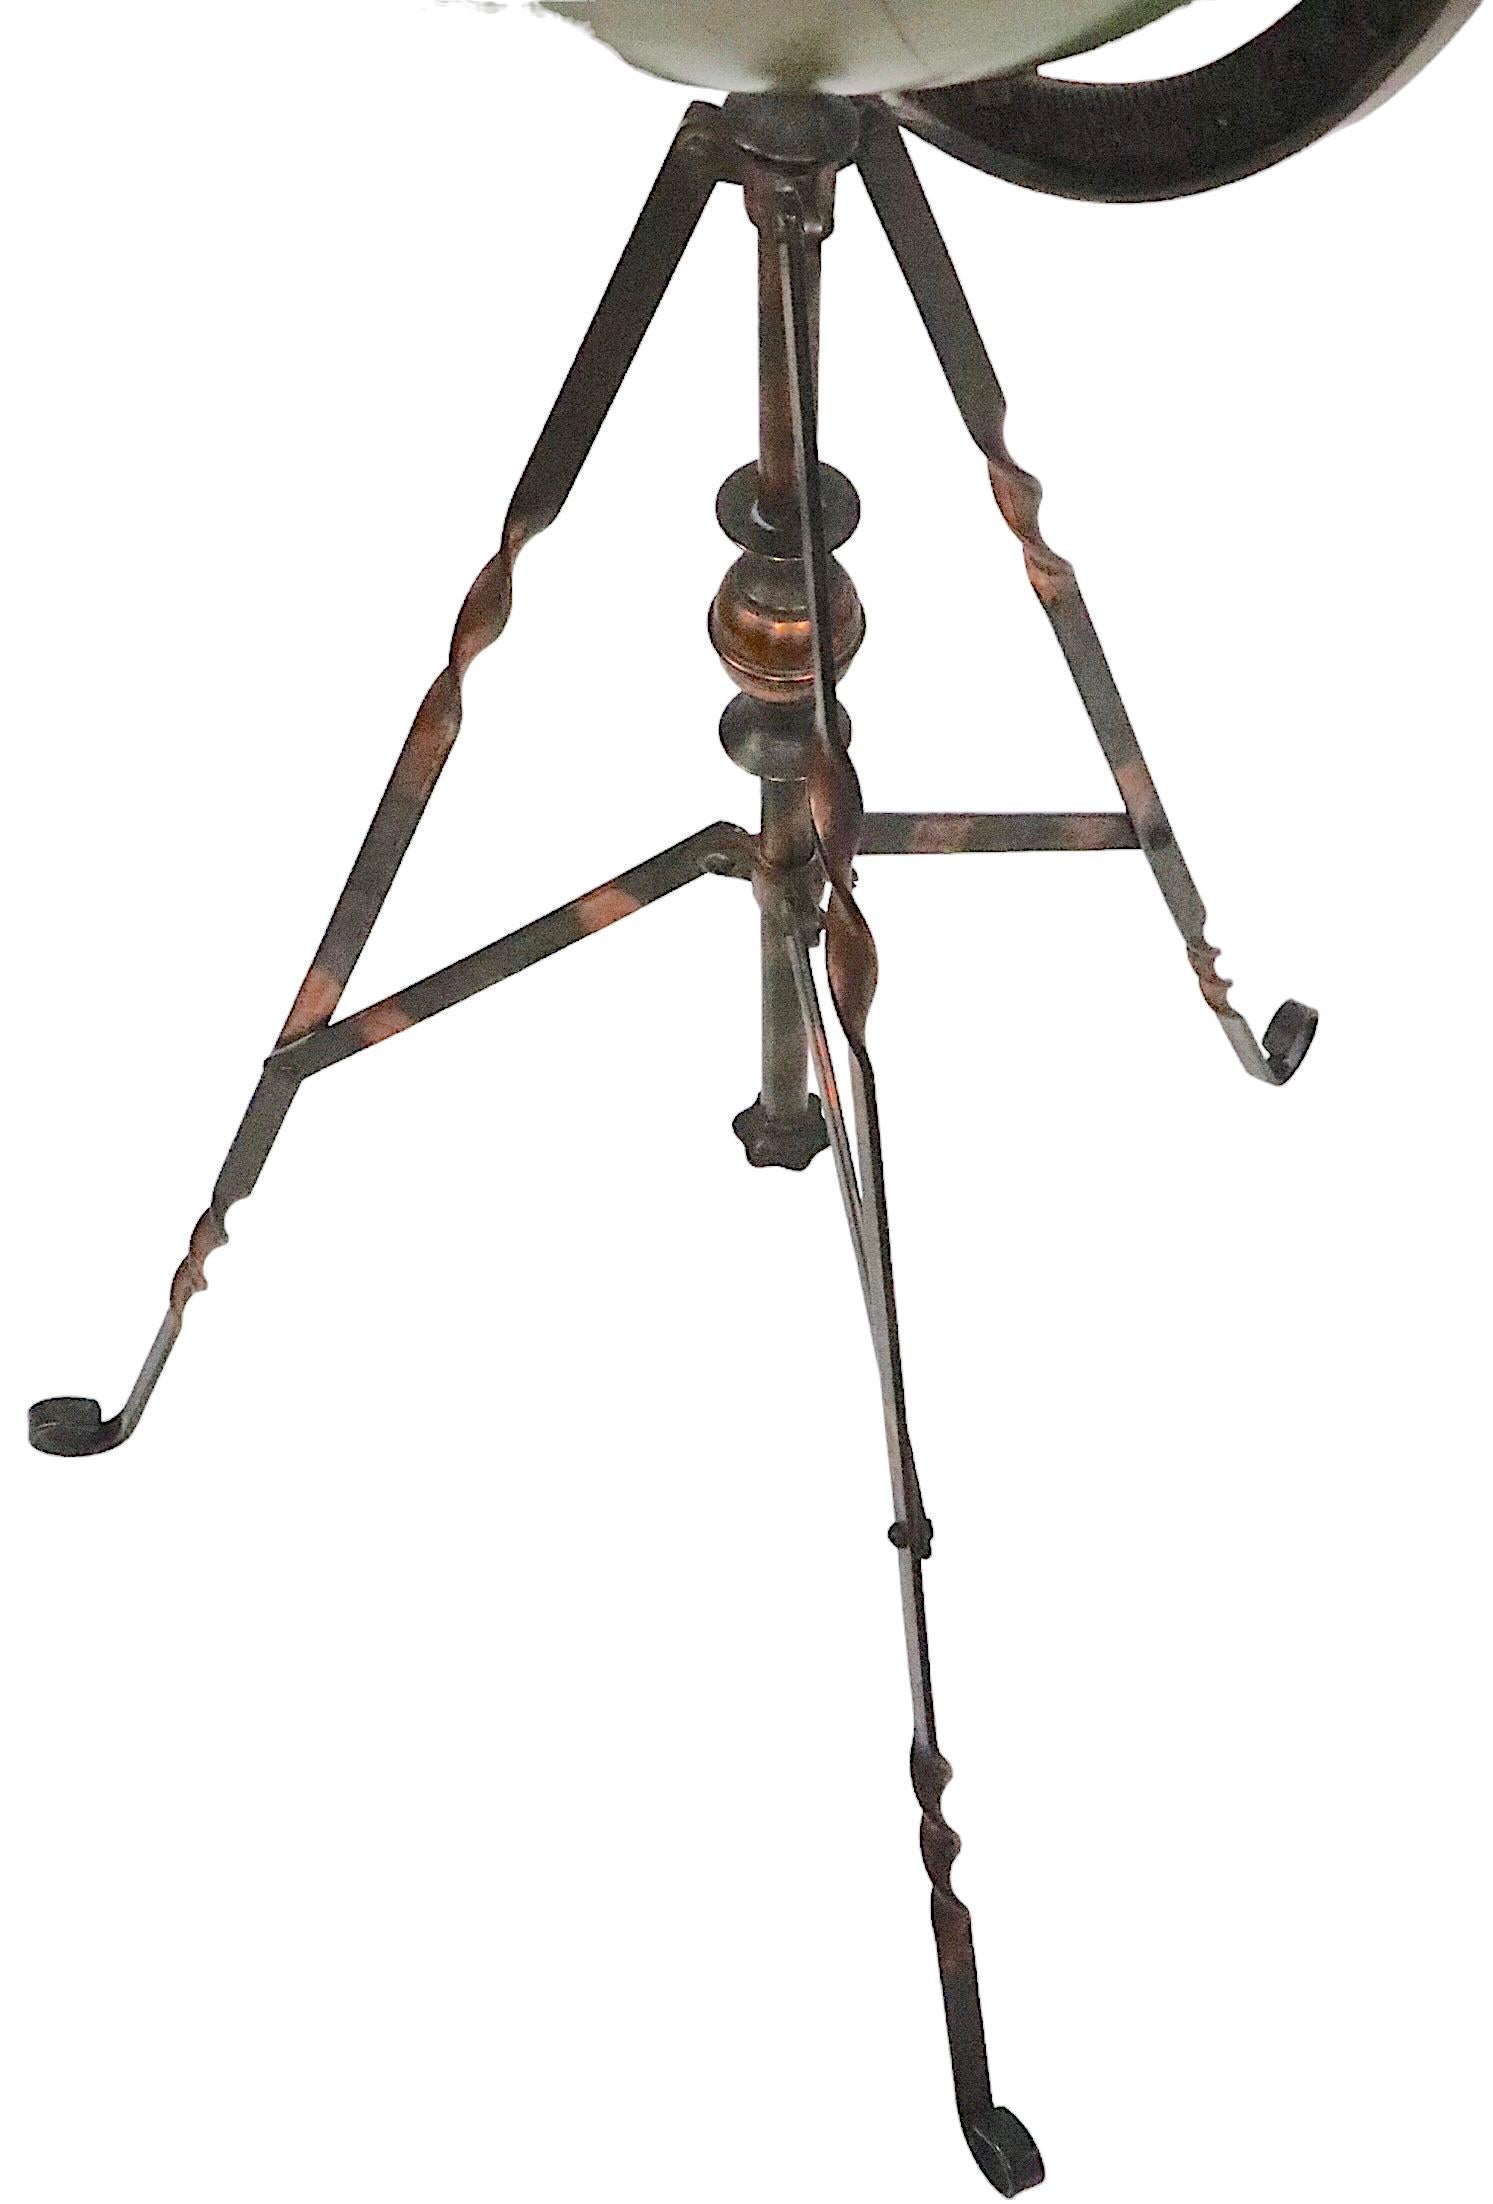 20th Century Antique Webber Costello Globe on Metal Tripod Base c 1900 / 1920's For Sale